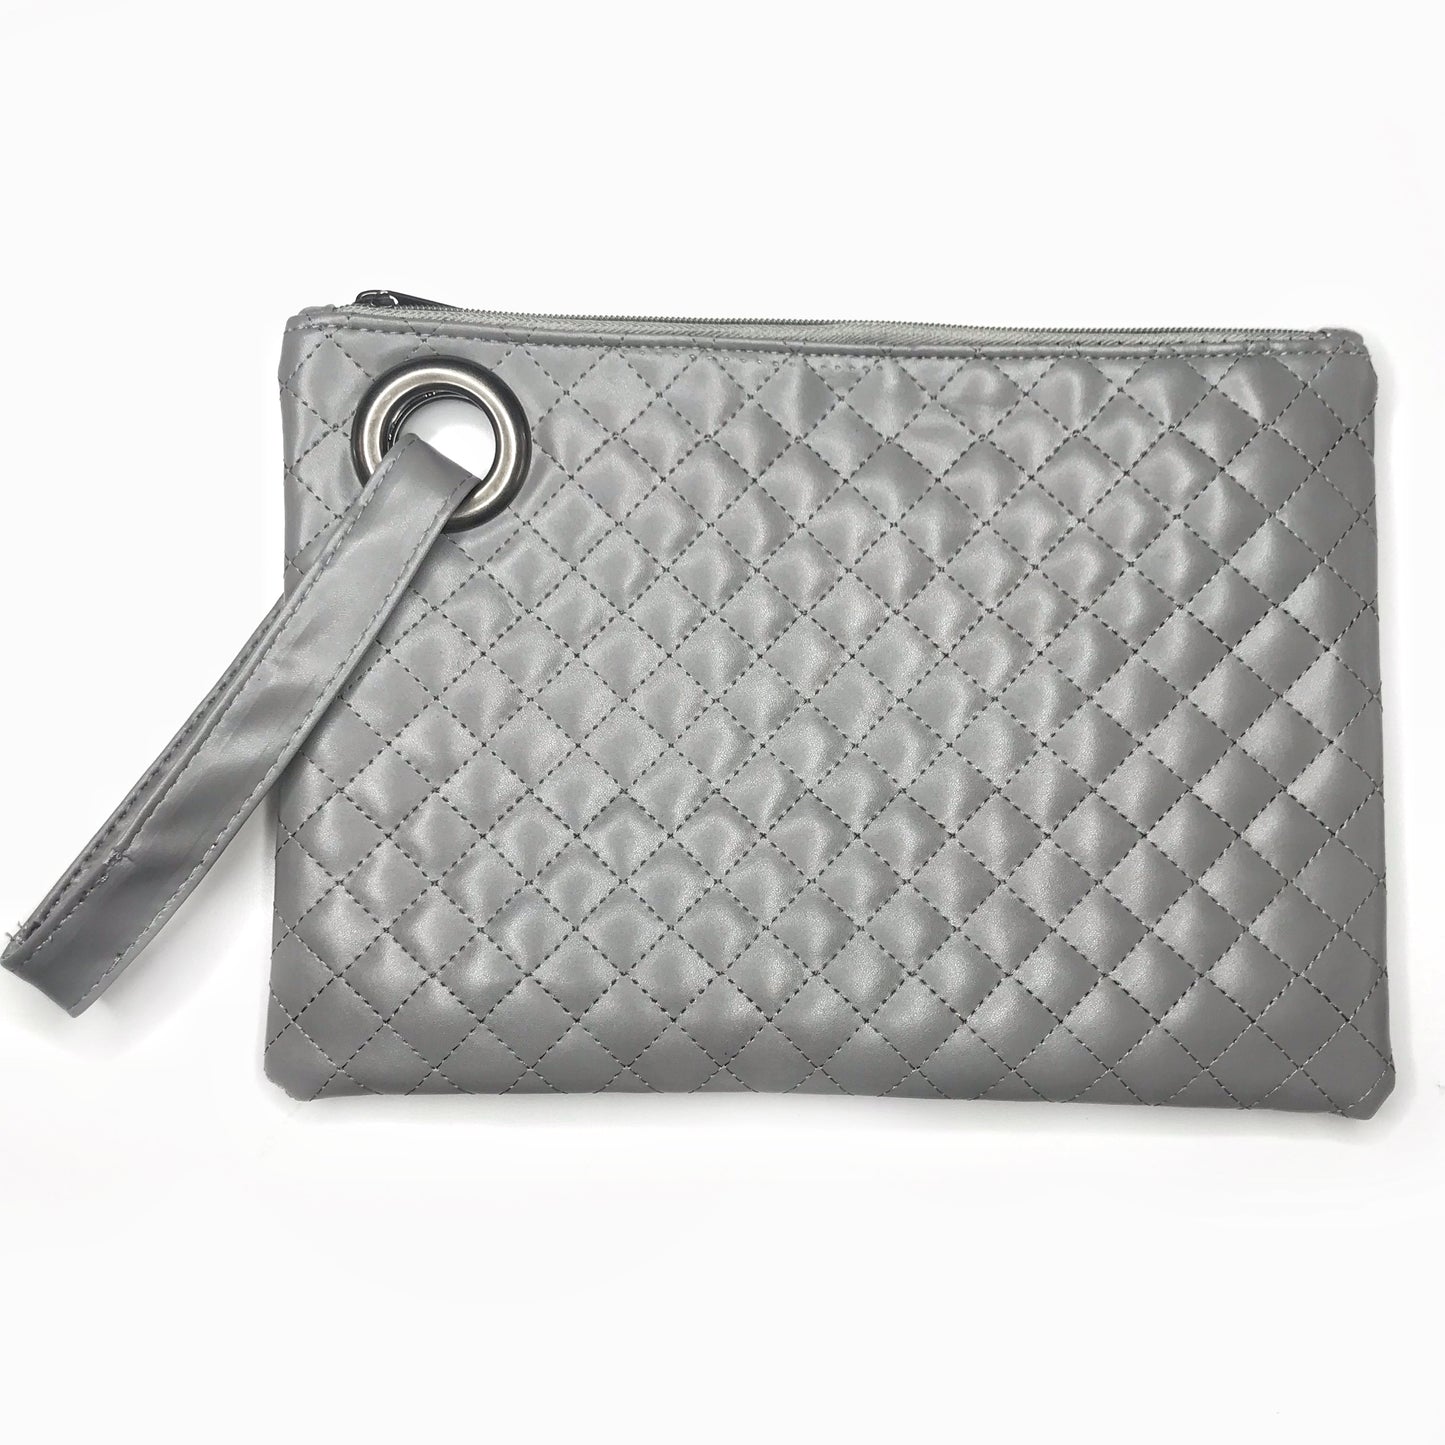 Vegan Leather Quilted Clutch with Handle & Grommet